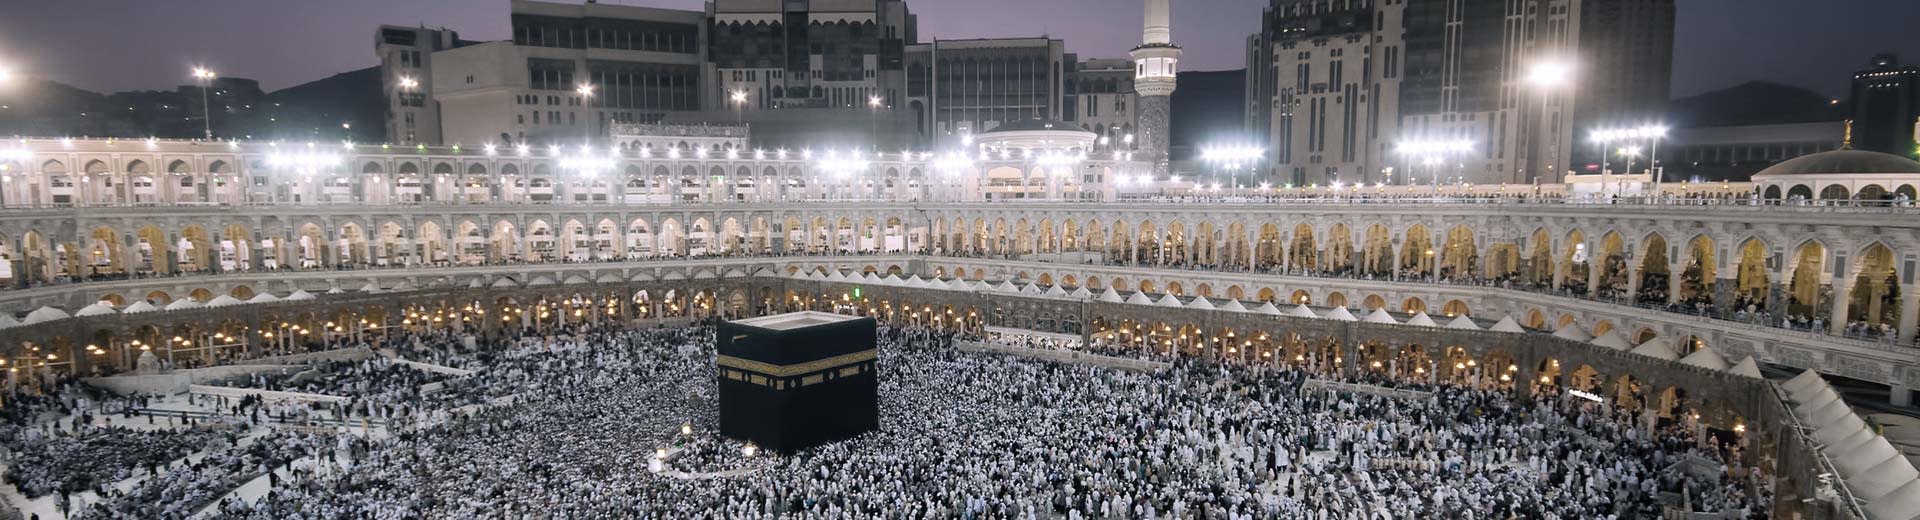 The famous Kaaba in Mecca at night, surrounded by worshippers.